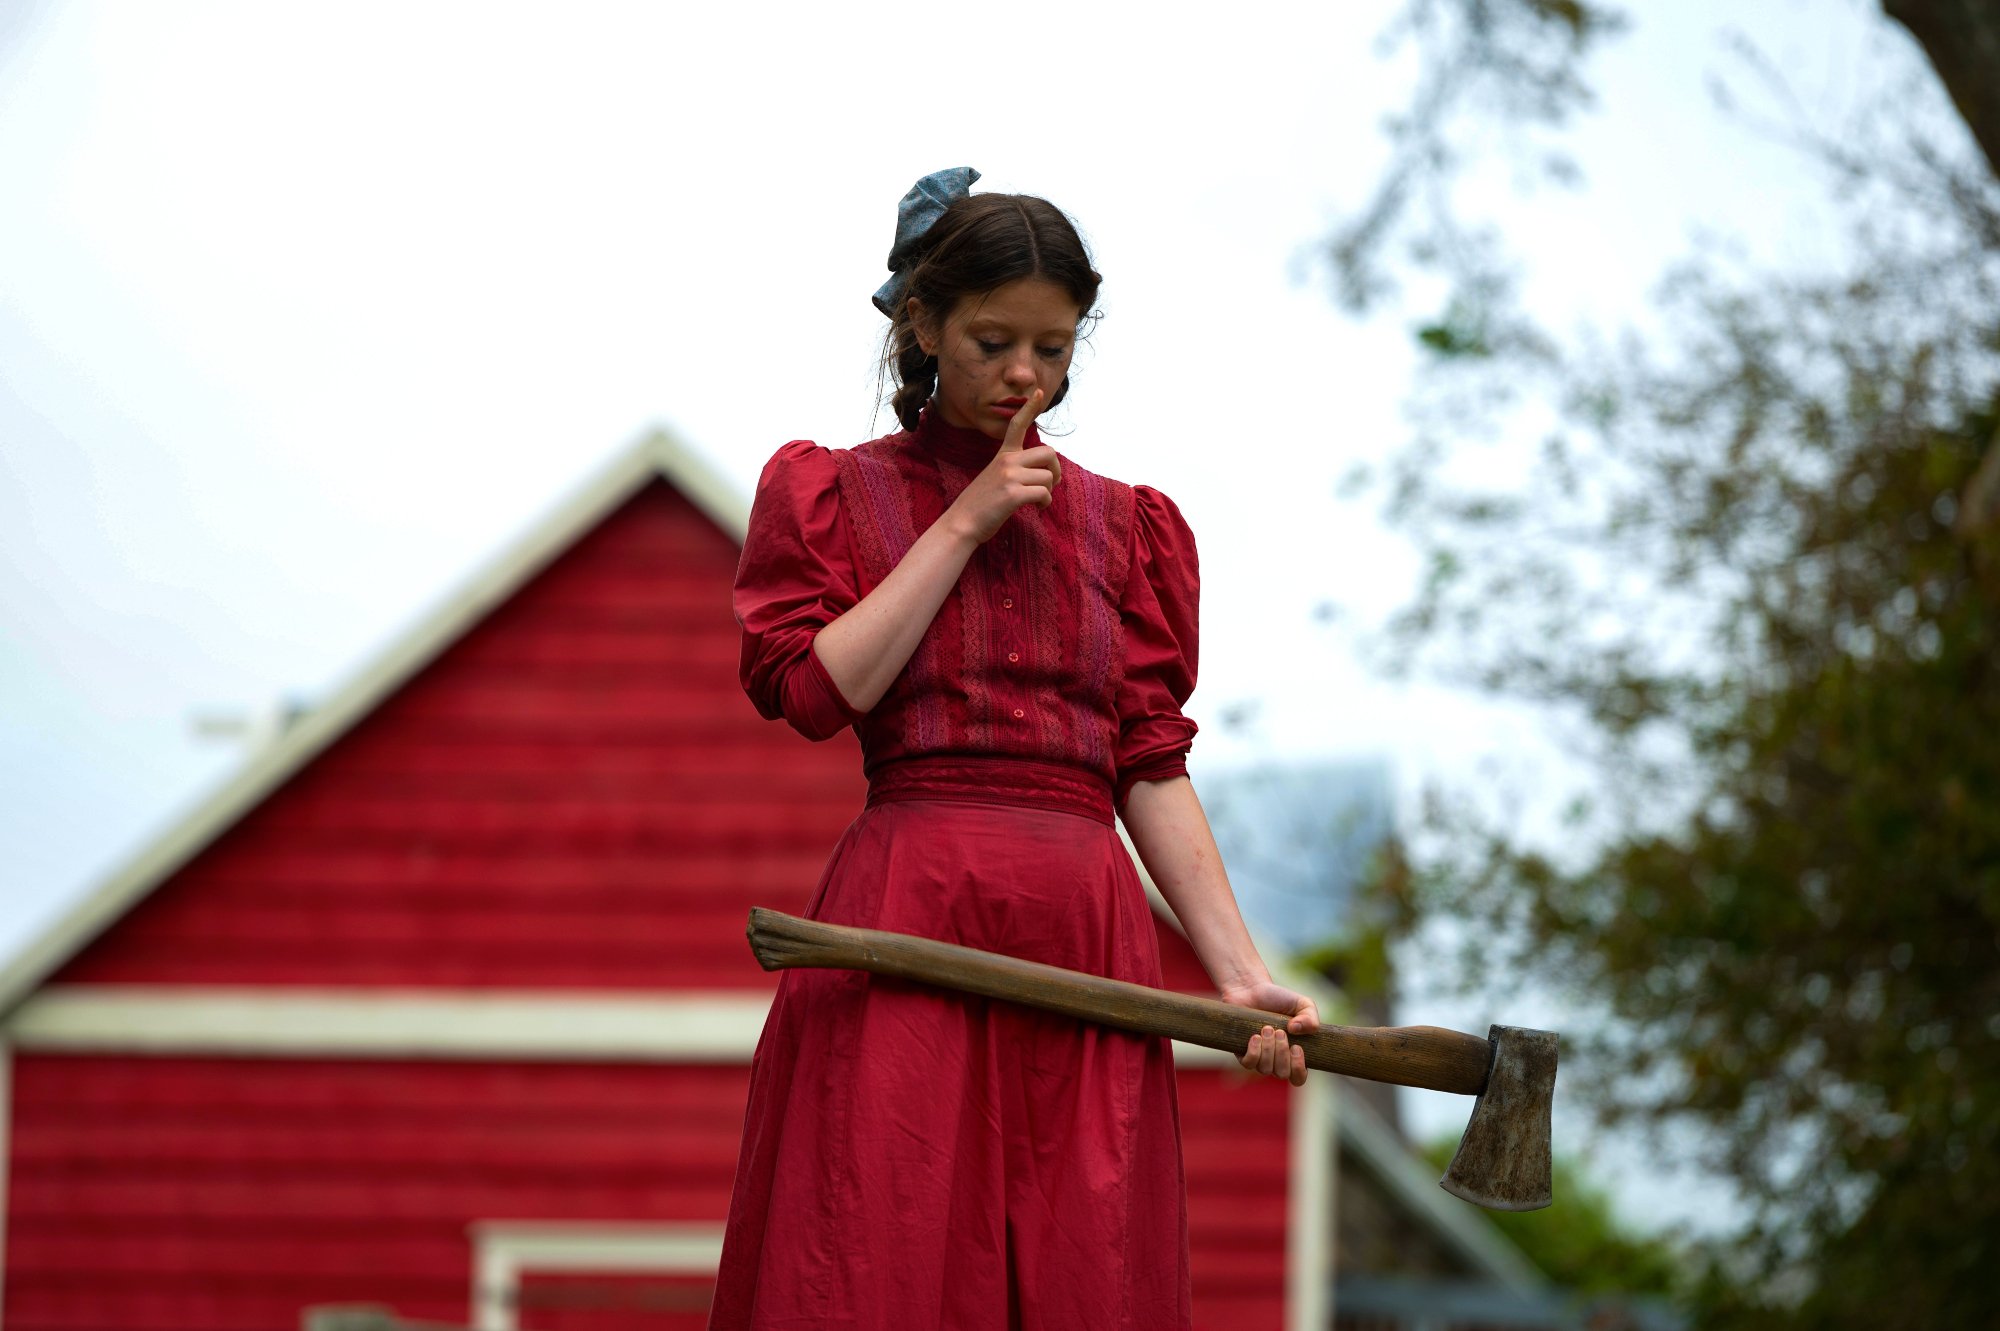 'Pearl' Mia Goth as Pearl wearing a red dress, holding an ax in front of a barn. She's holding a finger up to her lips to shush someone.